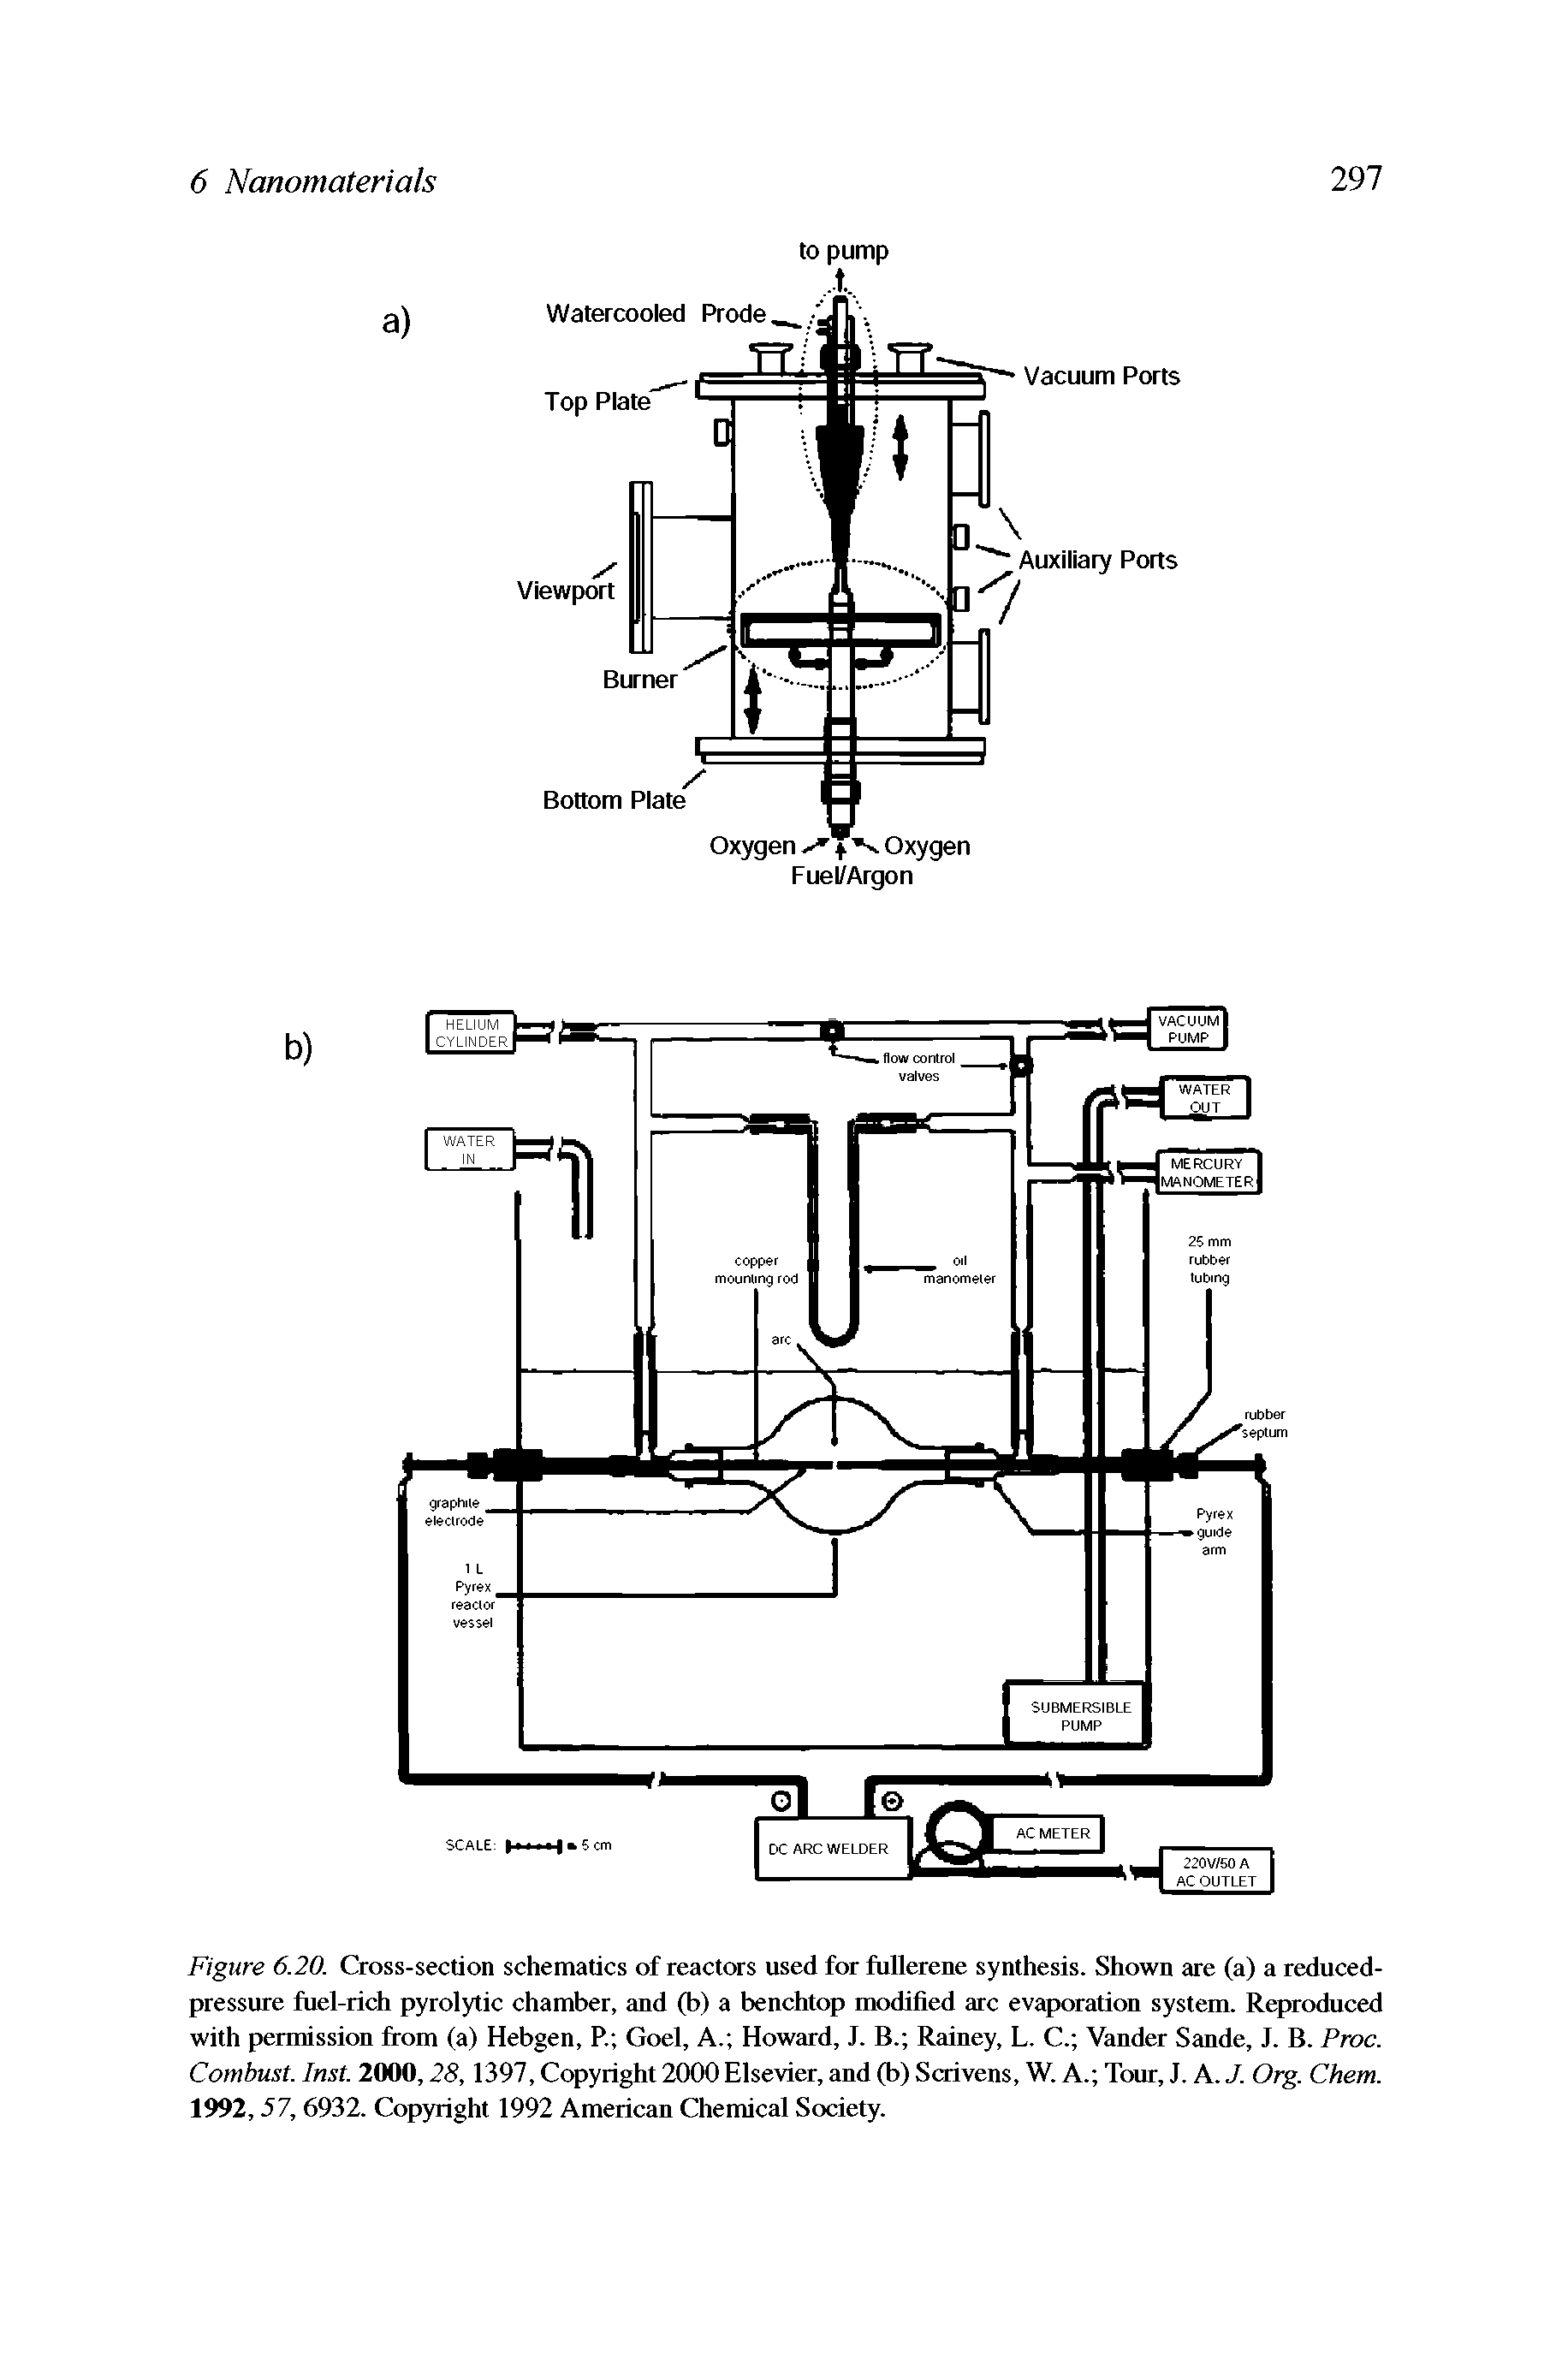 Figure 6.20. Cross-section schematics of reactors used for fullerene synthesis. Shown are (a) a reduced-pressure fuel-rich pyrolytic chamber, and (b) a benchtop modified arc evaporation system. Reproduced with permission from (a) Hebgen, R Goel, A. Howard, J. B. Rainey, L. C. Vander Sande, J. B. Proc. Combust. Inst 2000,28,1397, Copyright 2000 Elsevier, and (b) Scrivens, W. A. Tour, J. A. J. Org. Chem. 1992,57, 6932. Copyright 1992 American Chemical Society.